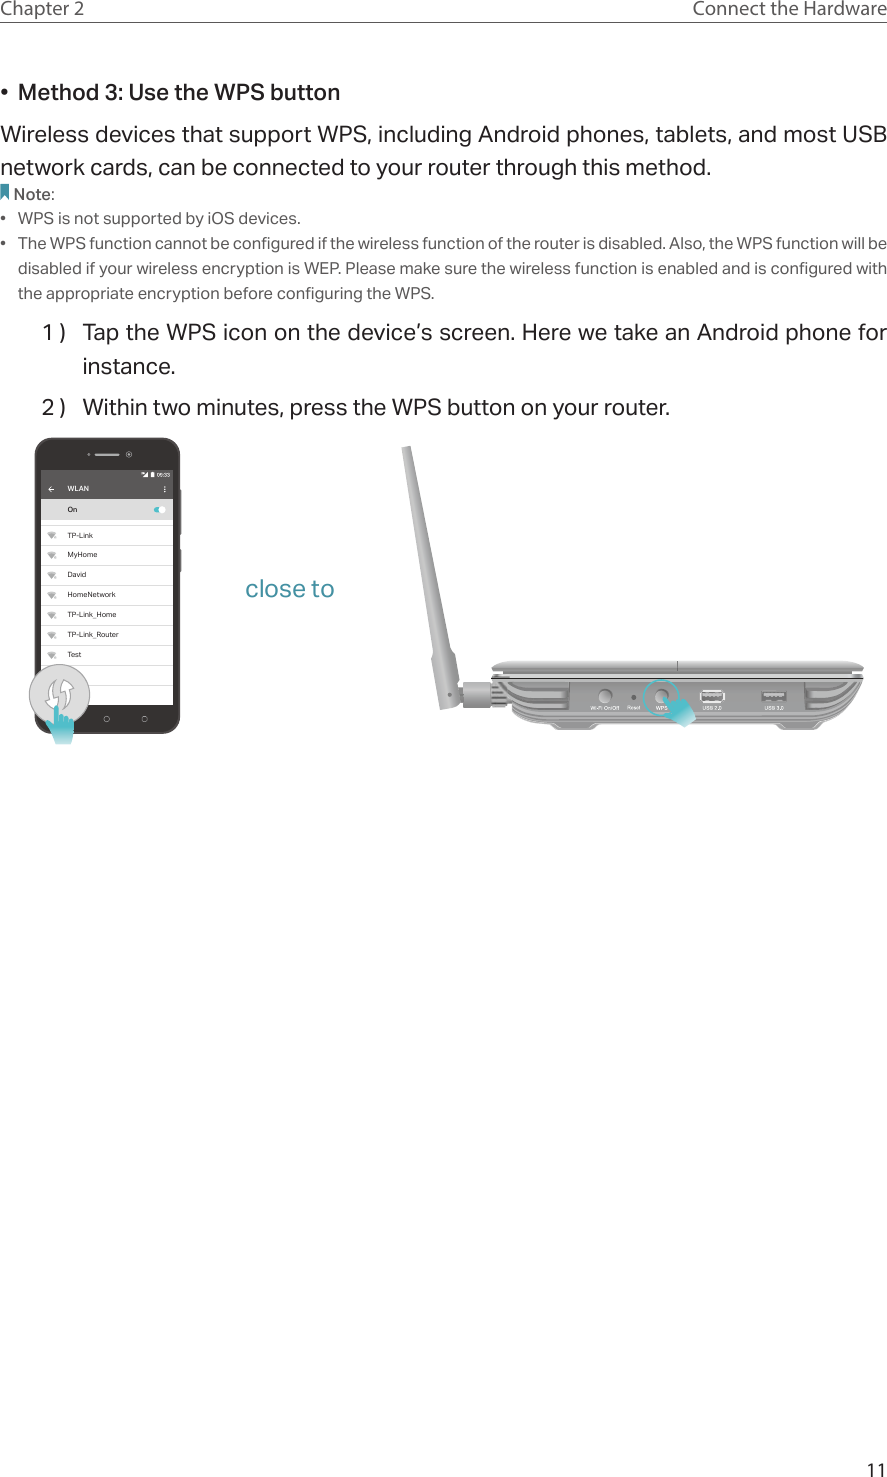 11Chapter 2 Connect the Hardware•  Method 3: Use the WPS buttonWireless devices that support WPS, including Android phones, tablets, and most USB network cards, can be connected to your router through this method.Note:•  WPS is not supported by iOS devices.•  The WPS function cannot be configured if the wireless function of the router is disabled. Also, the WPS function will be disabled if your wireless encryption is WEP. Please make sure the wireless function is enabled and is configured with the appropriate encryption before configuring the WPS.1 )  Tap the WPS icon on the device’s screen. Here we take an Android phone for instance.2 )  Within two minutes, press the WPS button on your router. WLANOnTP-LinkMyHomeDavidHomeNetworkTP-Link_HomeTP-Link_RouterTestclose to